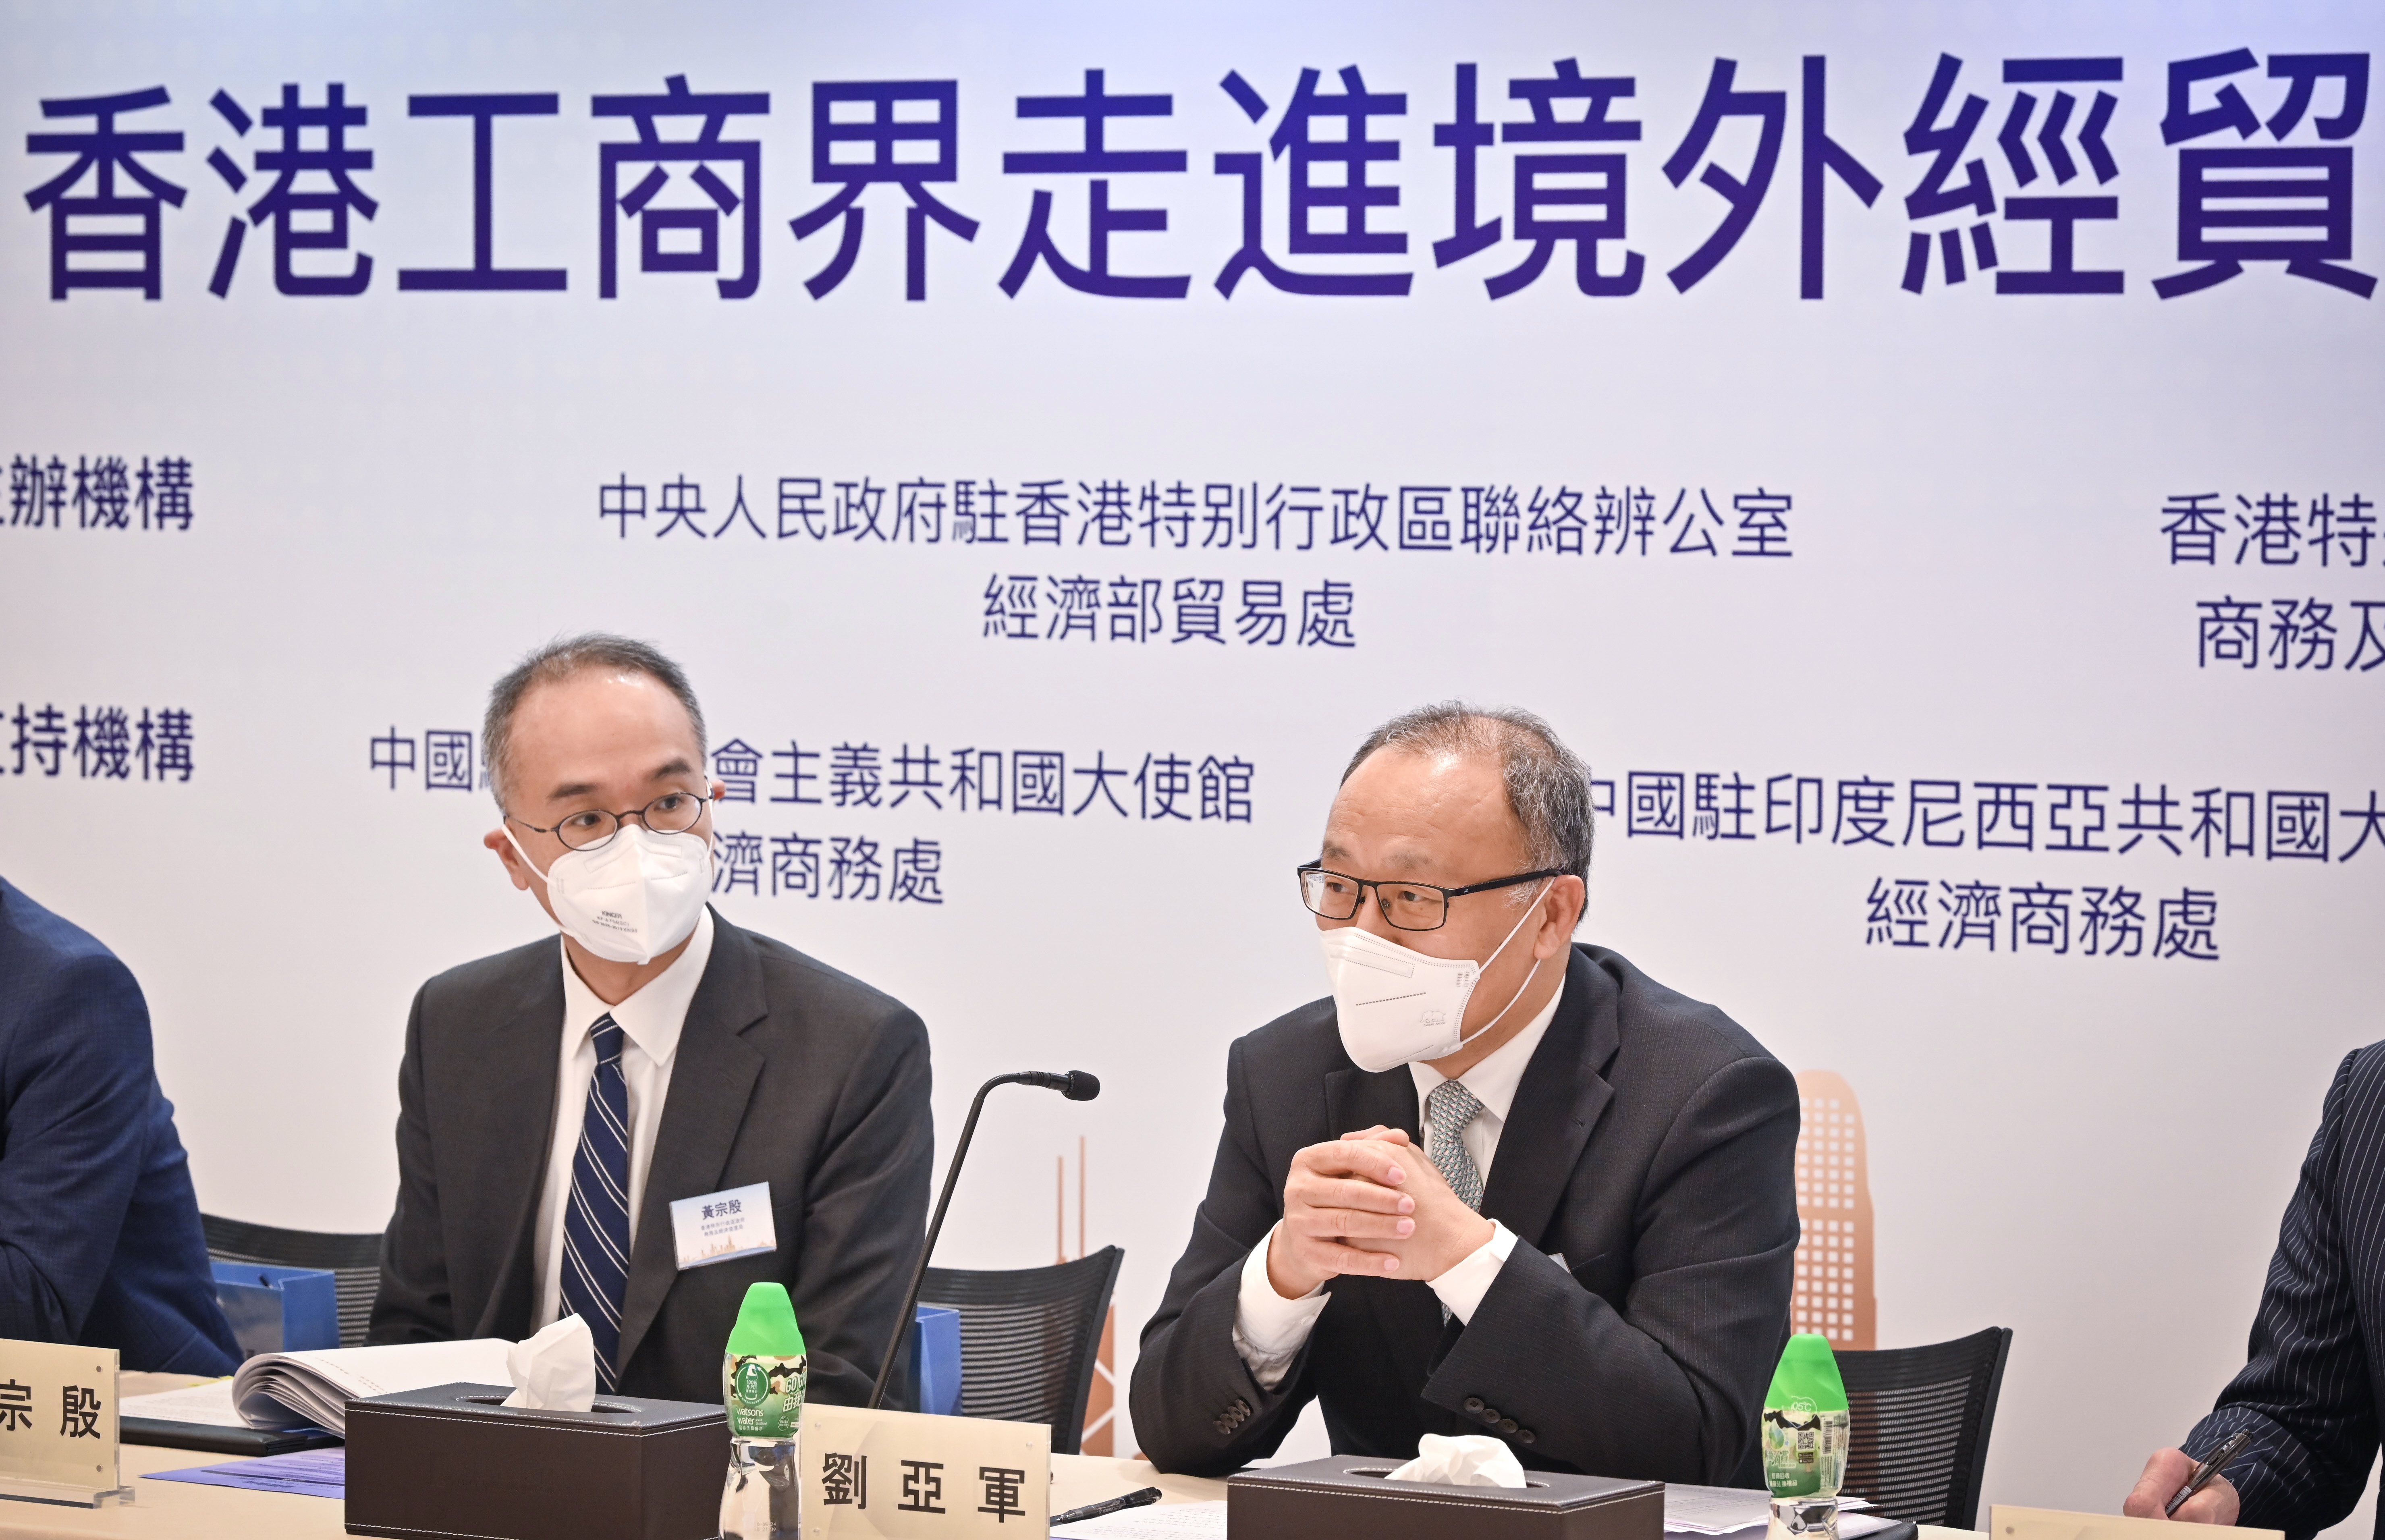 The Deputy Director-General of the Economic Affairs Department and Head of the Commercial Office of the LOCPG in the HKSAR, Mr Liu Yajun (right), spoke at the seminar on promoting collaboration in overseas Economic and Trade Co-operation Zones on 30 November 2022.  Looking on is the Acting Commissioner for Belt and Road, Mr Johann Wong (left).